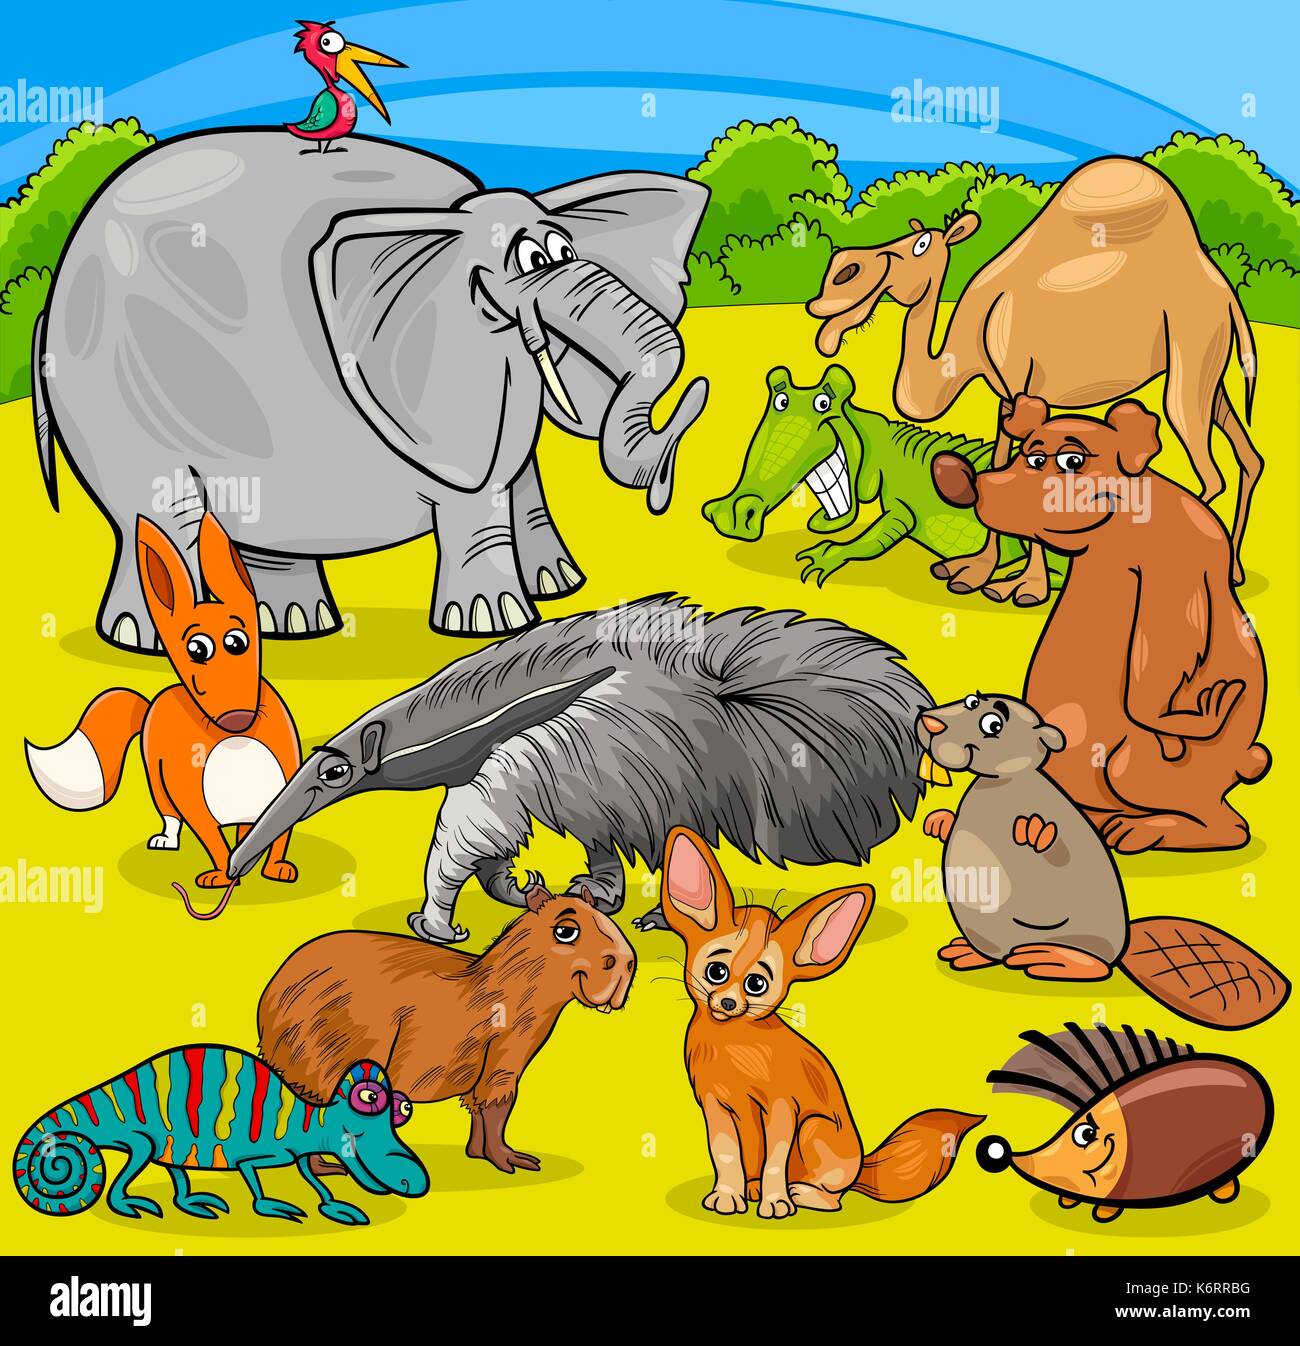 Cartoon Illustration of Funny Animal Characters Group Stock Vector